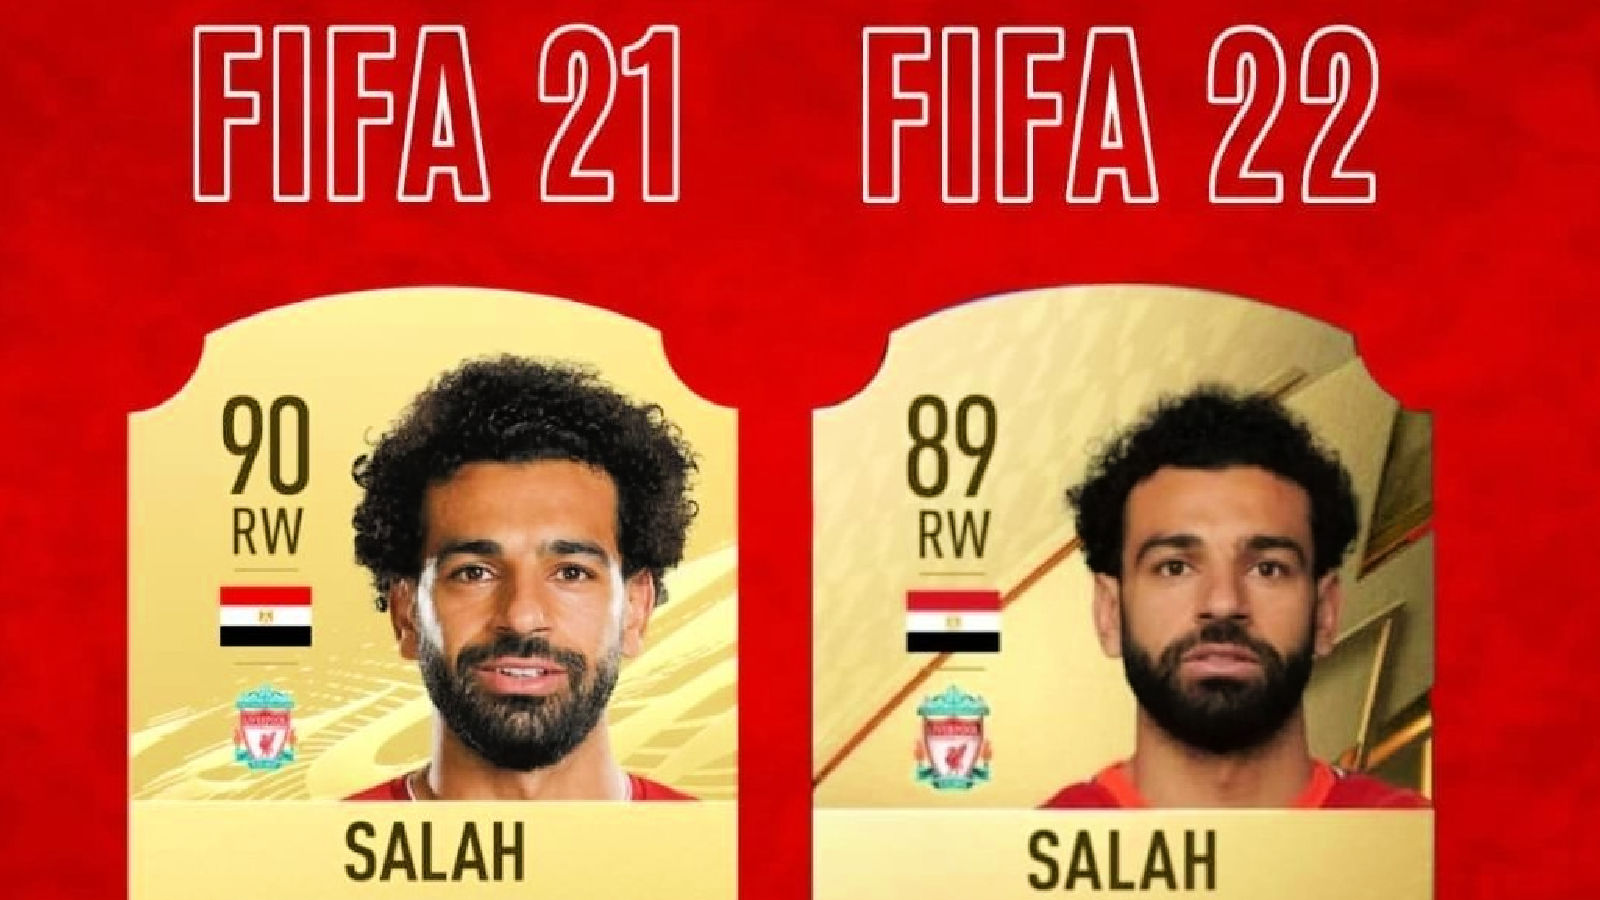 The FIFA 22 rating controversies people can’t stop talking about